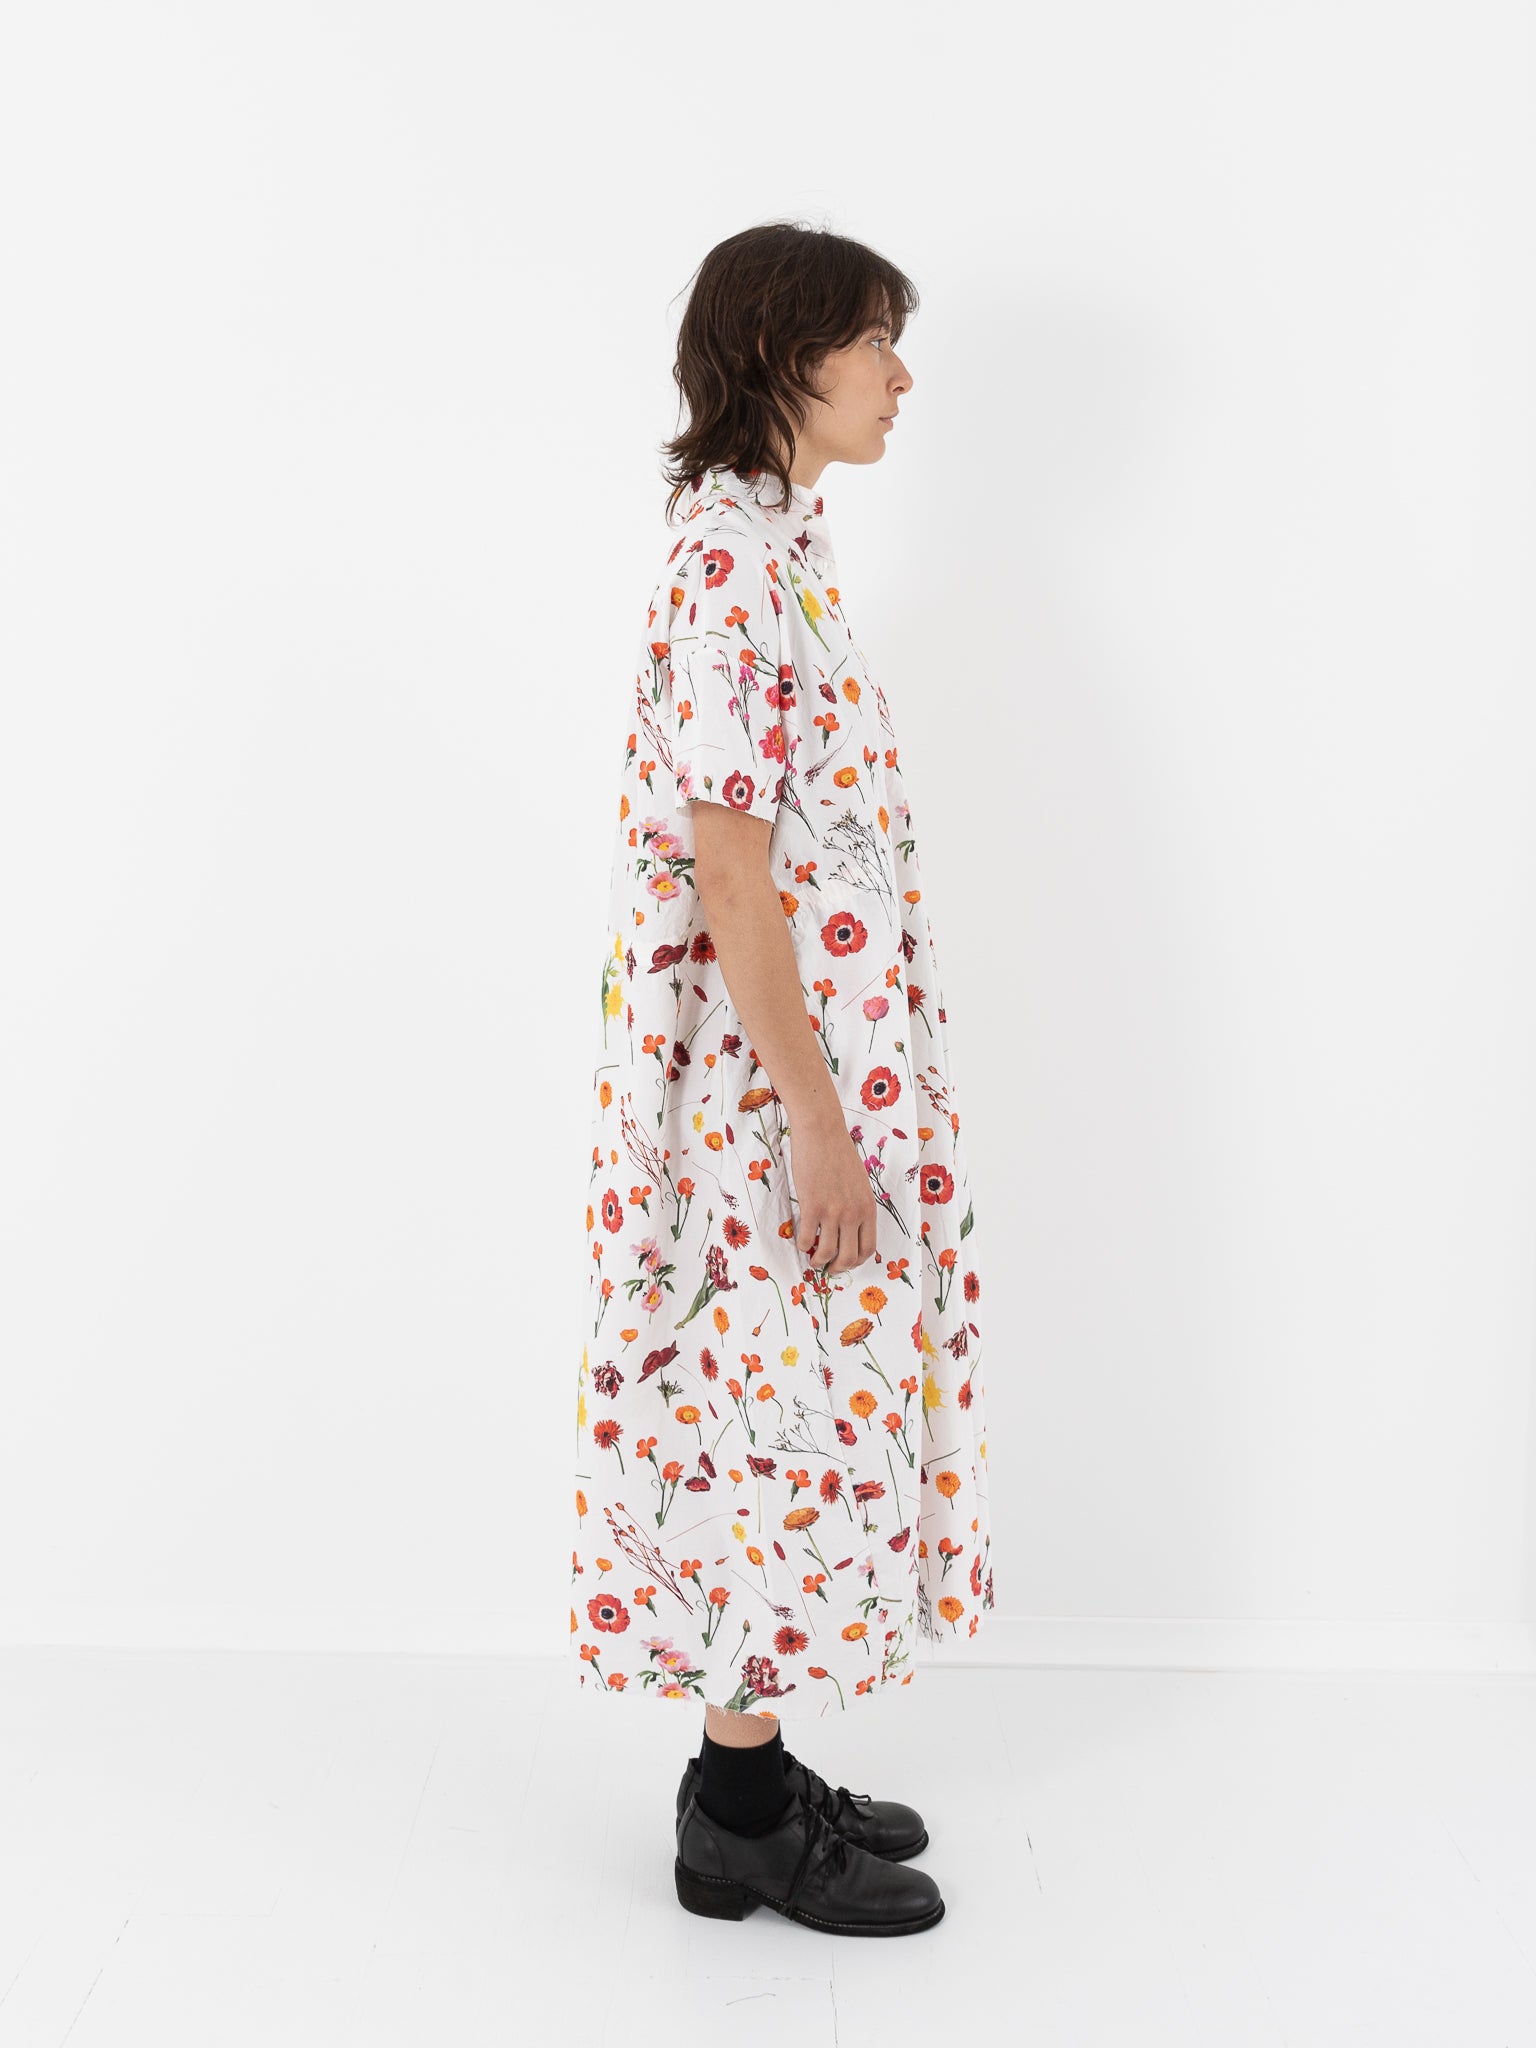 Hannoh Wessel Reana Dress, Red Flowers - Worthwhile, Inc.